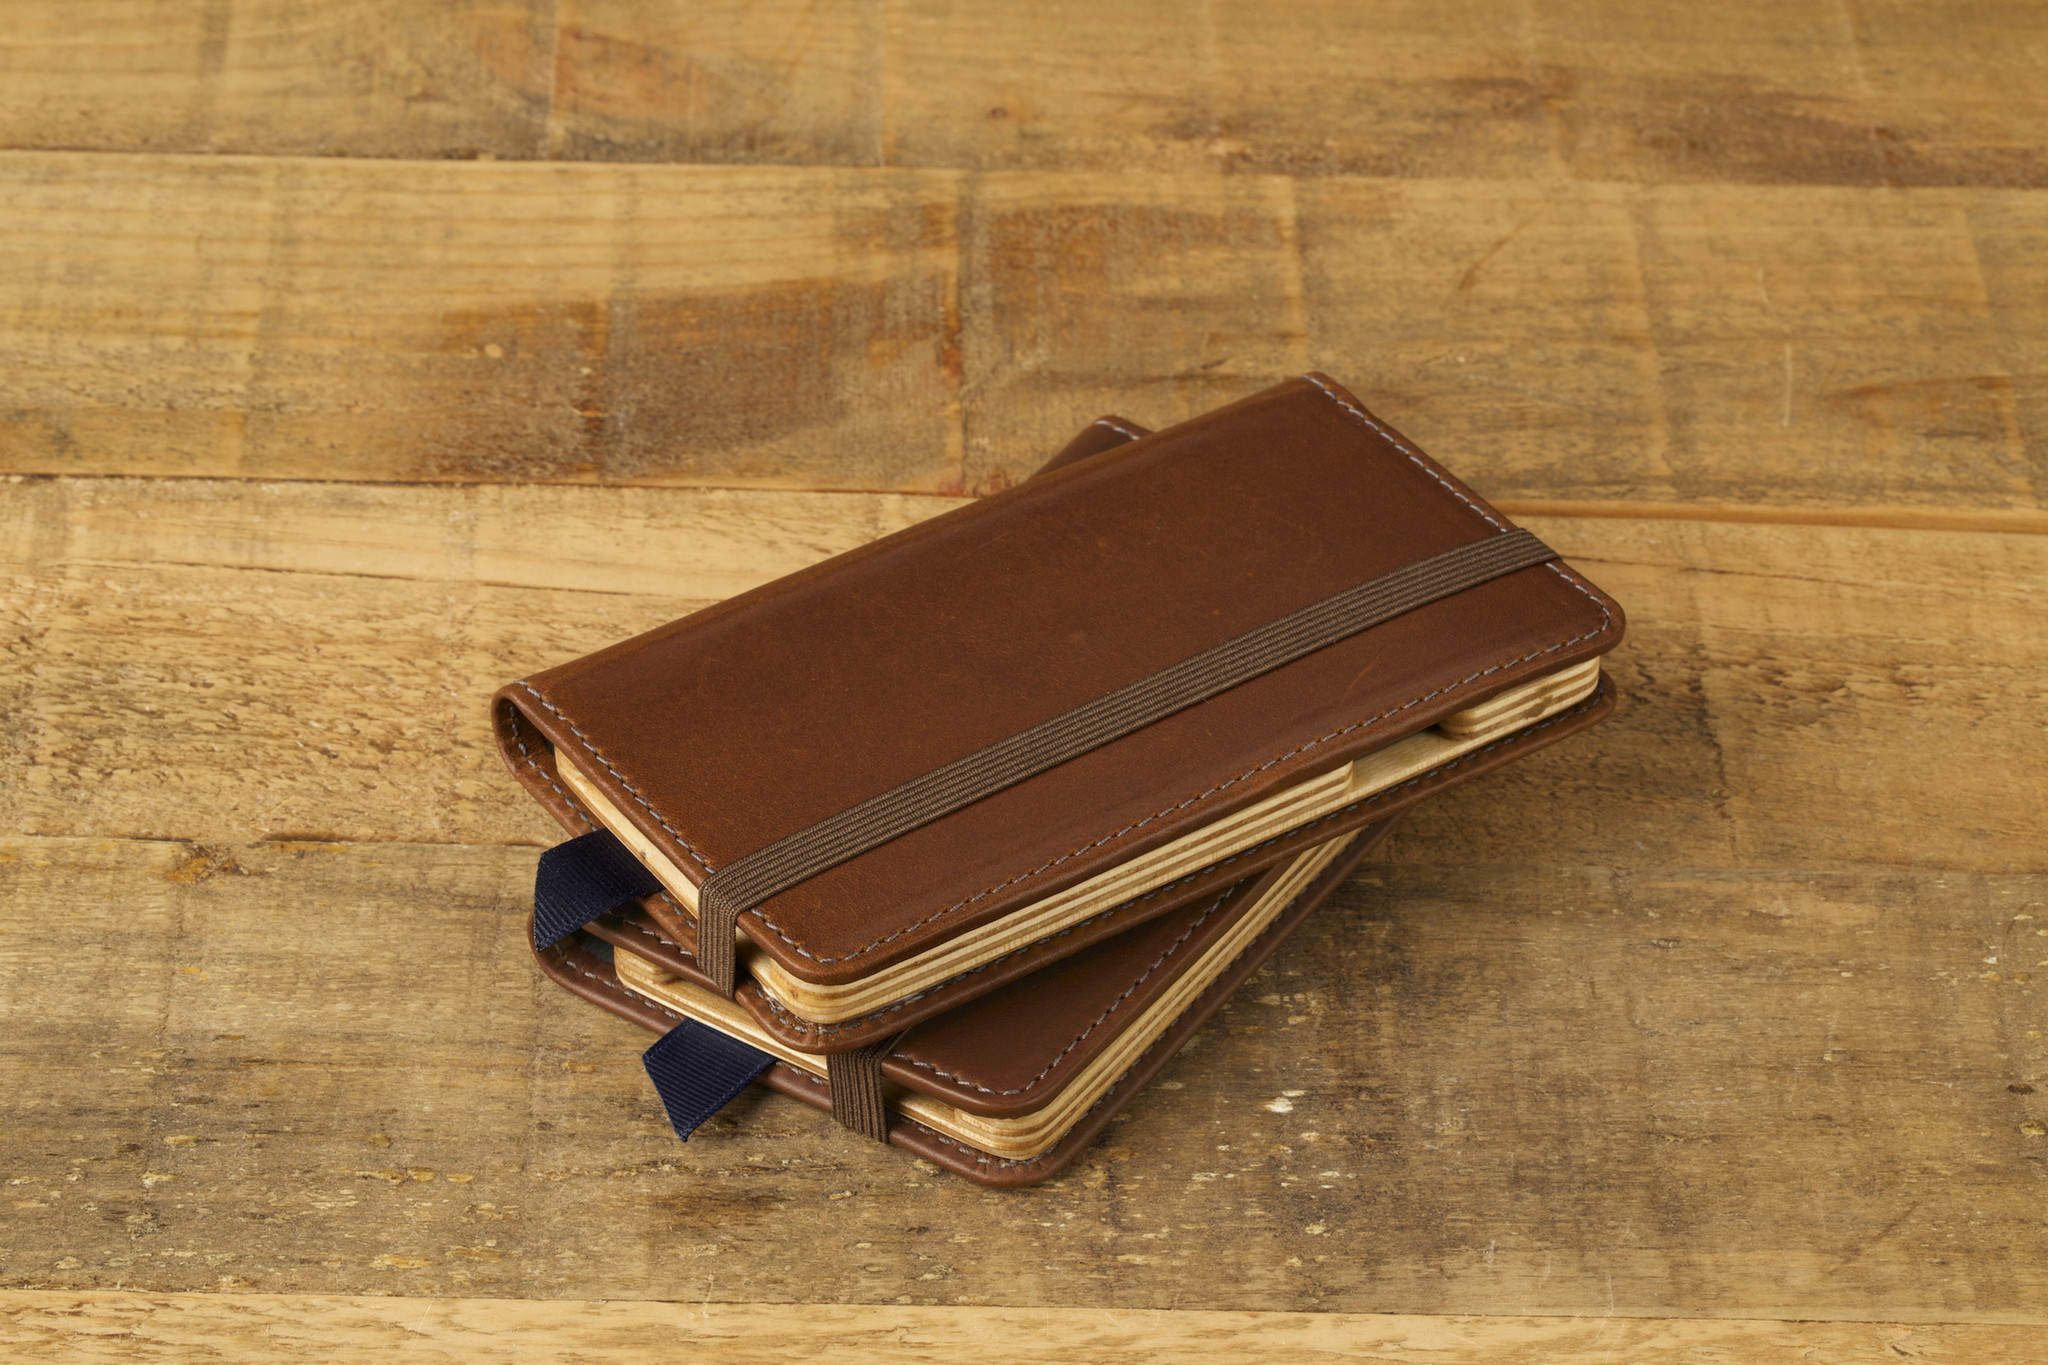 Pad & Quill case